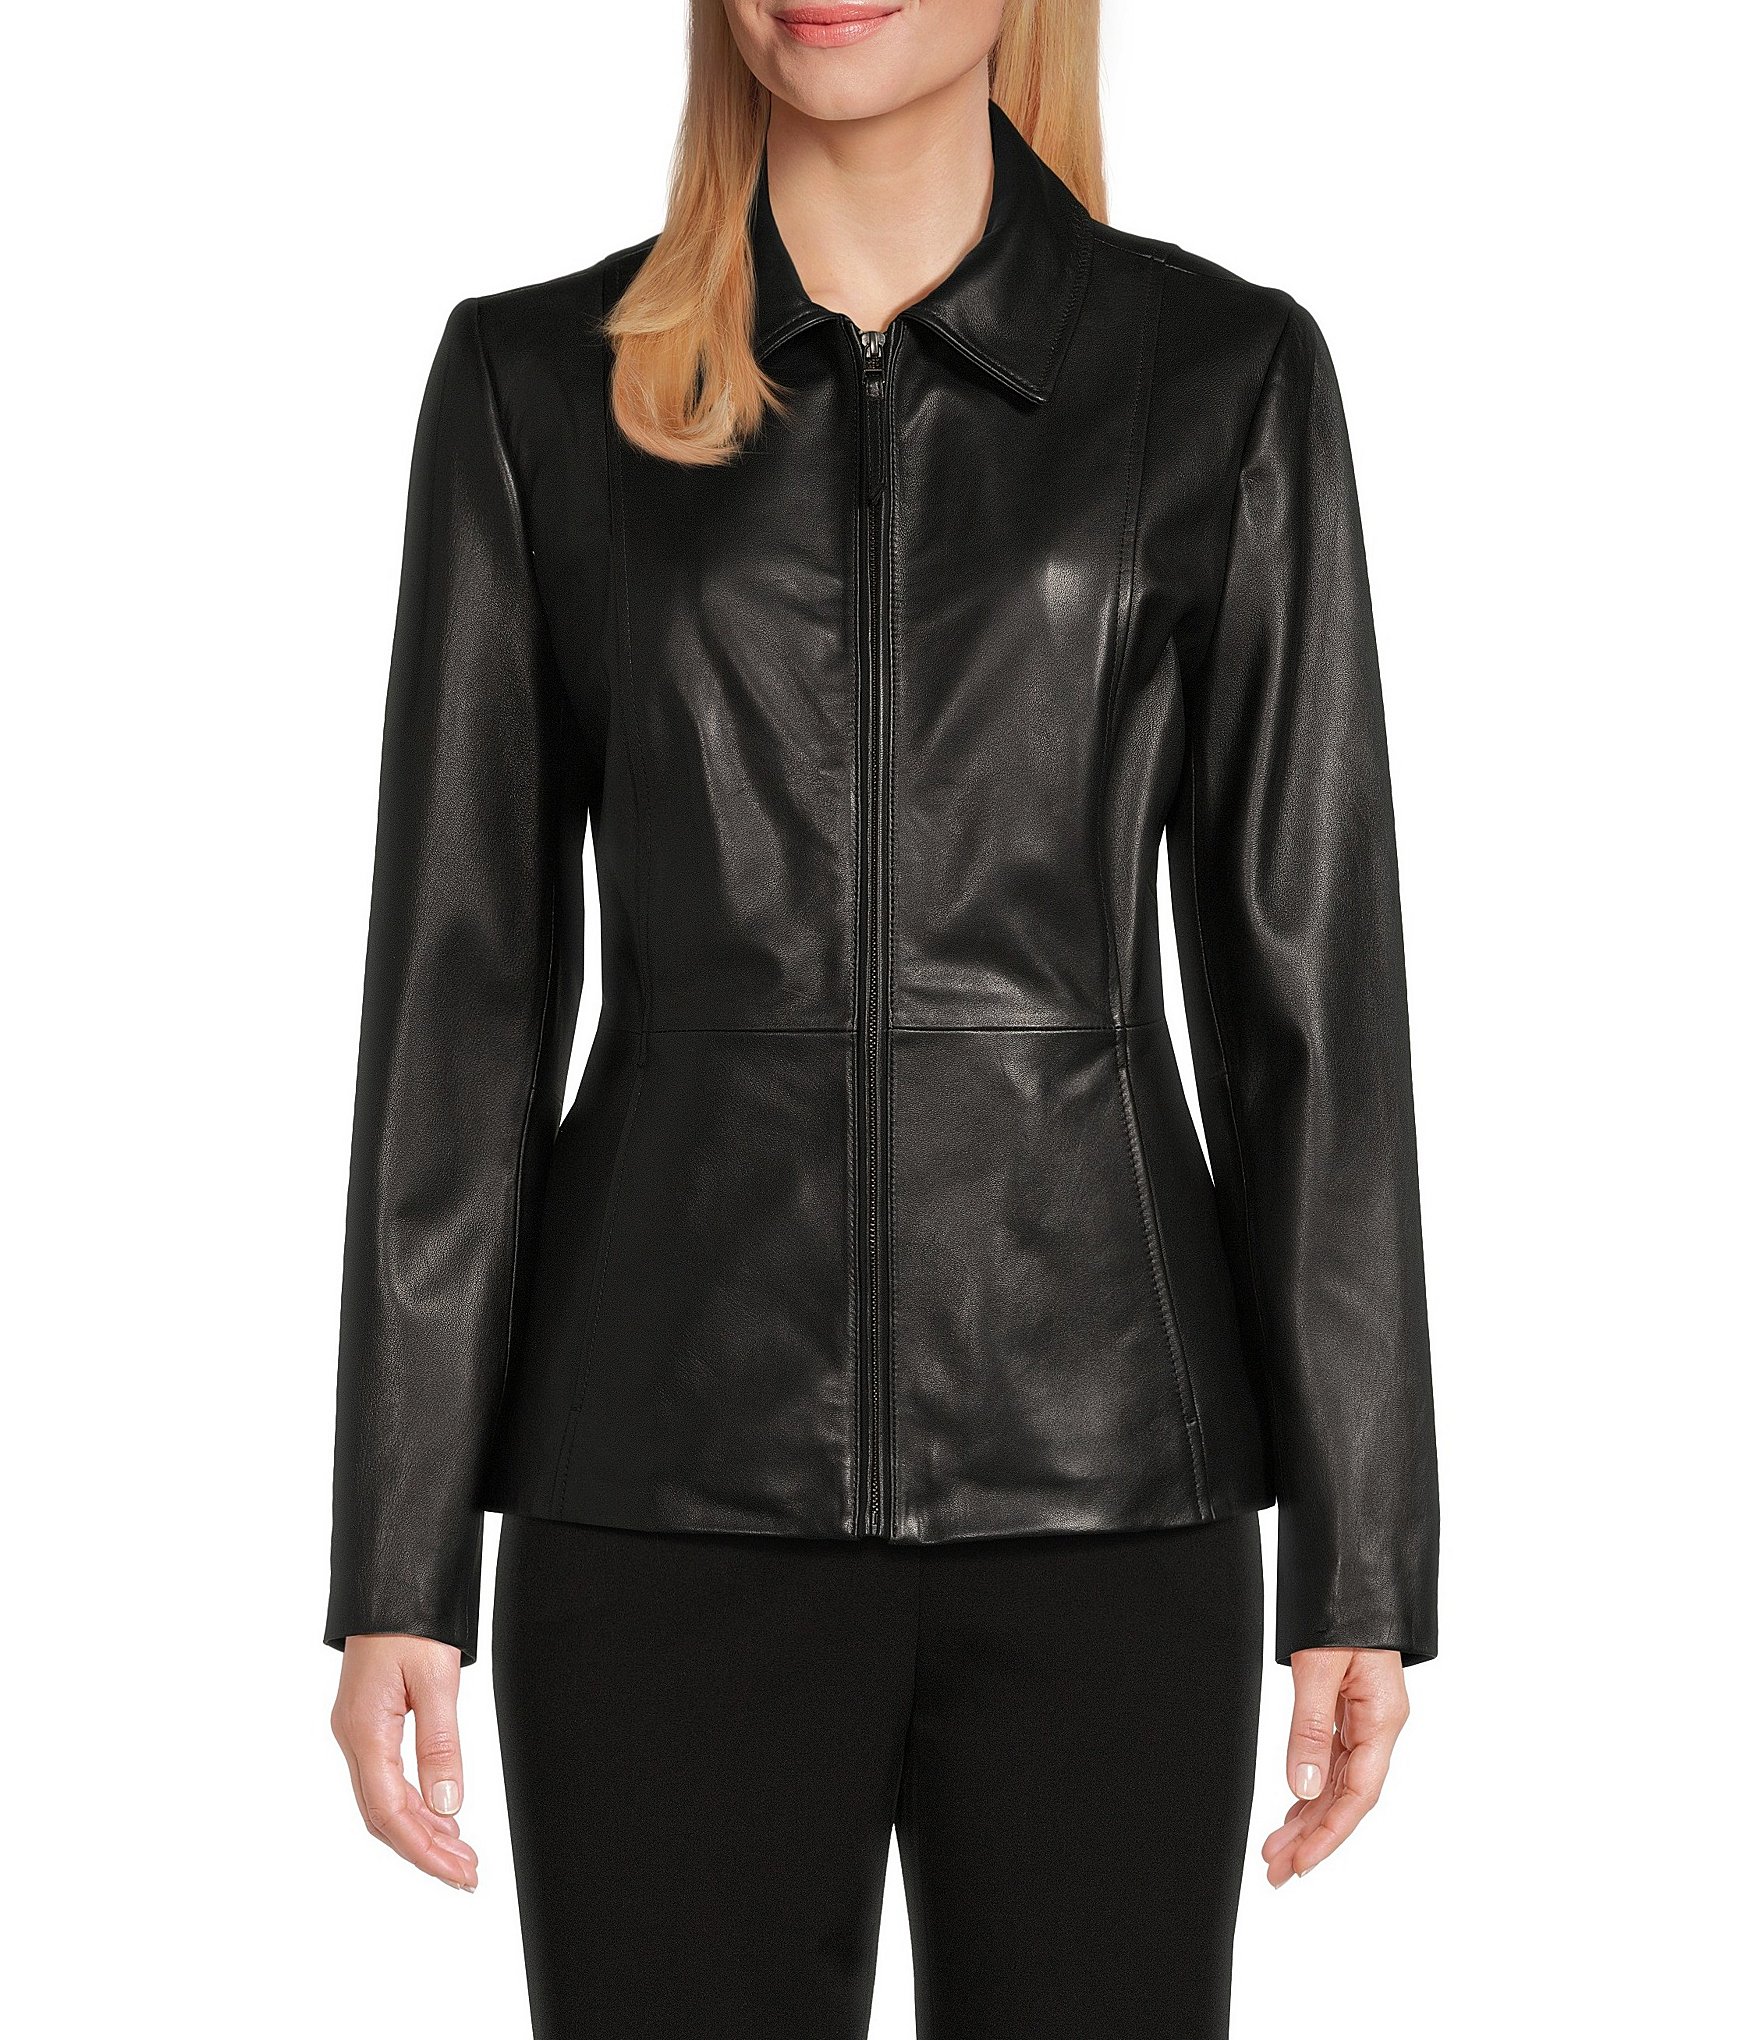 Women's Edition Point Collar Jacket in Old English Leather - Thursday